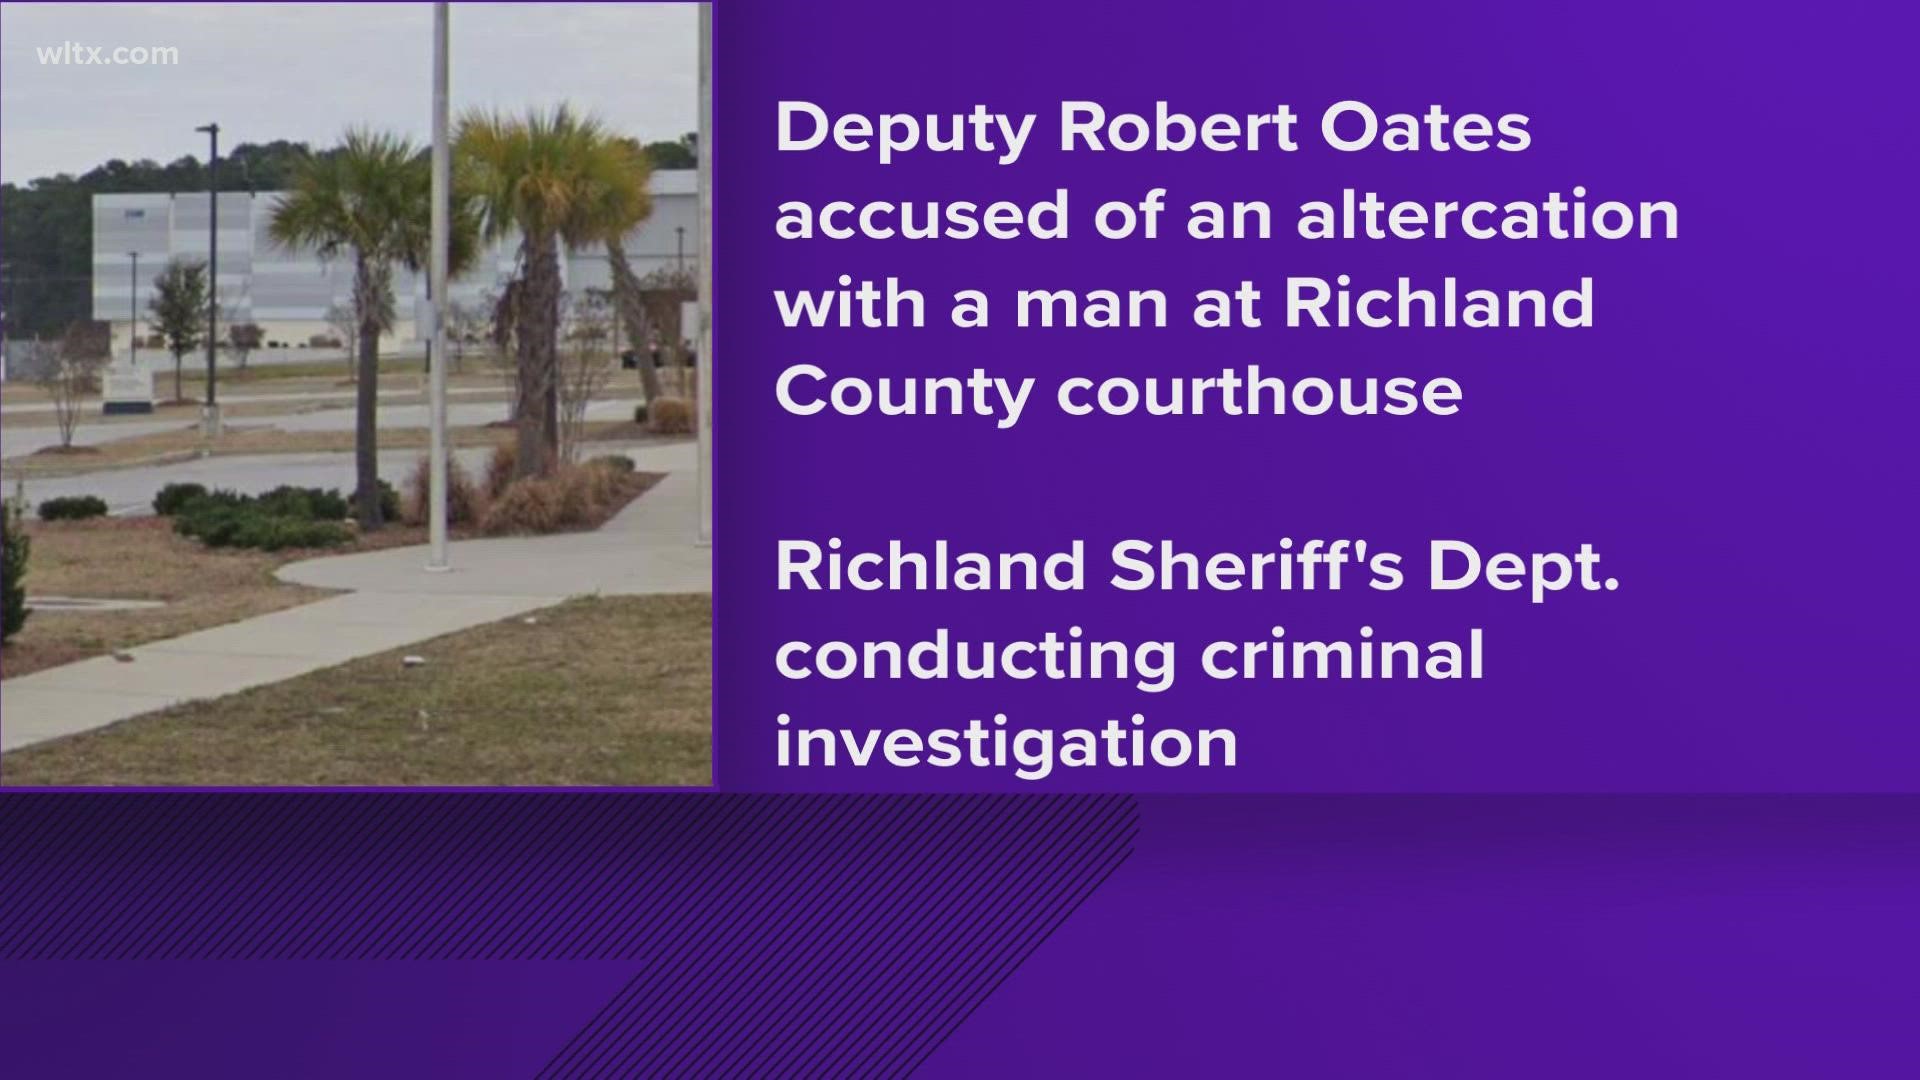 The incident happened outside of the Richland County Courthouse